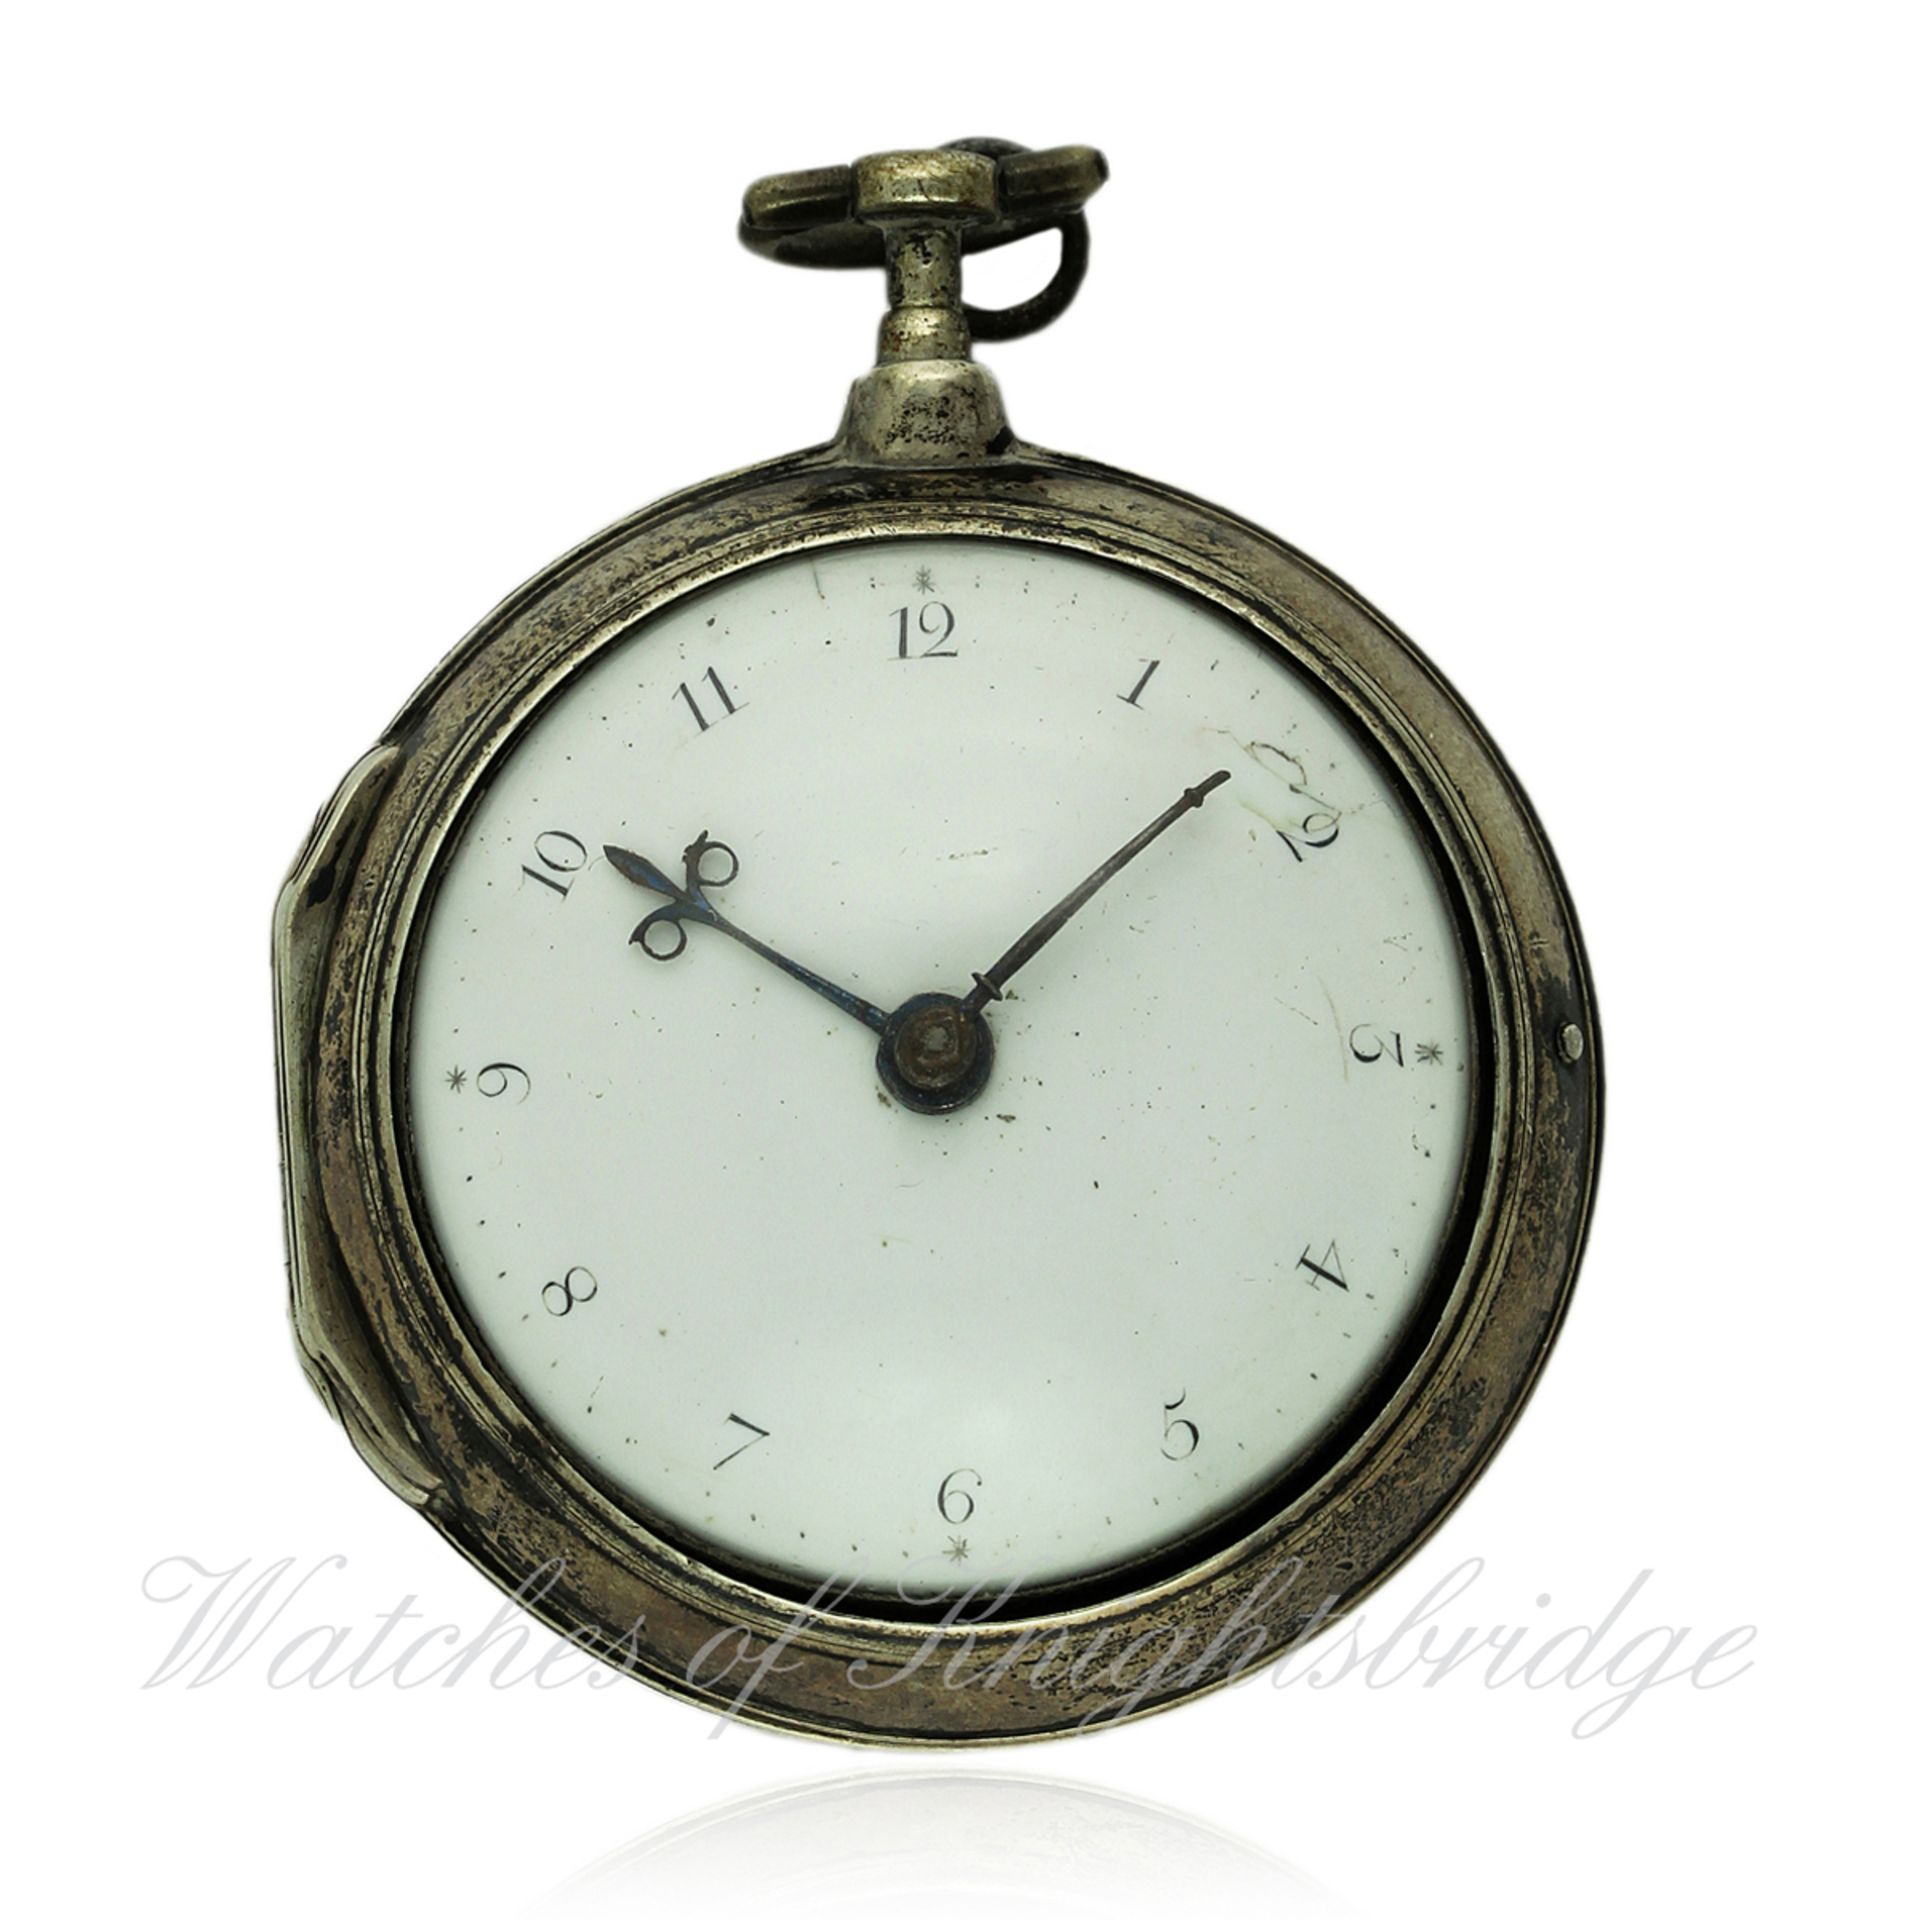 A GENTLEMAN`S SOLID SILVER PAIR CASED FUSEE VERGE POCKET WATCH CIRCA 1827 D: Enamel dial with